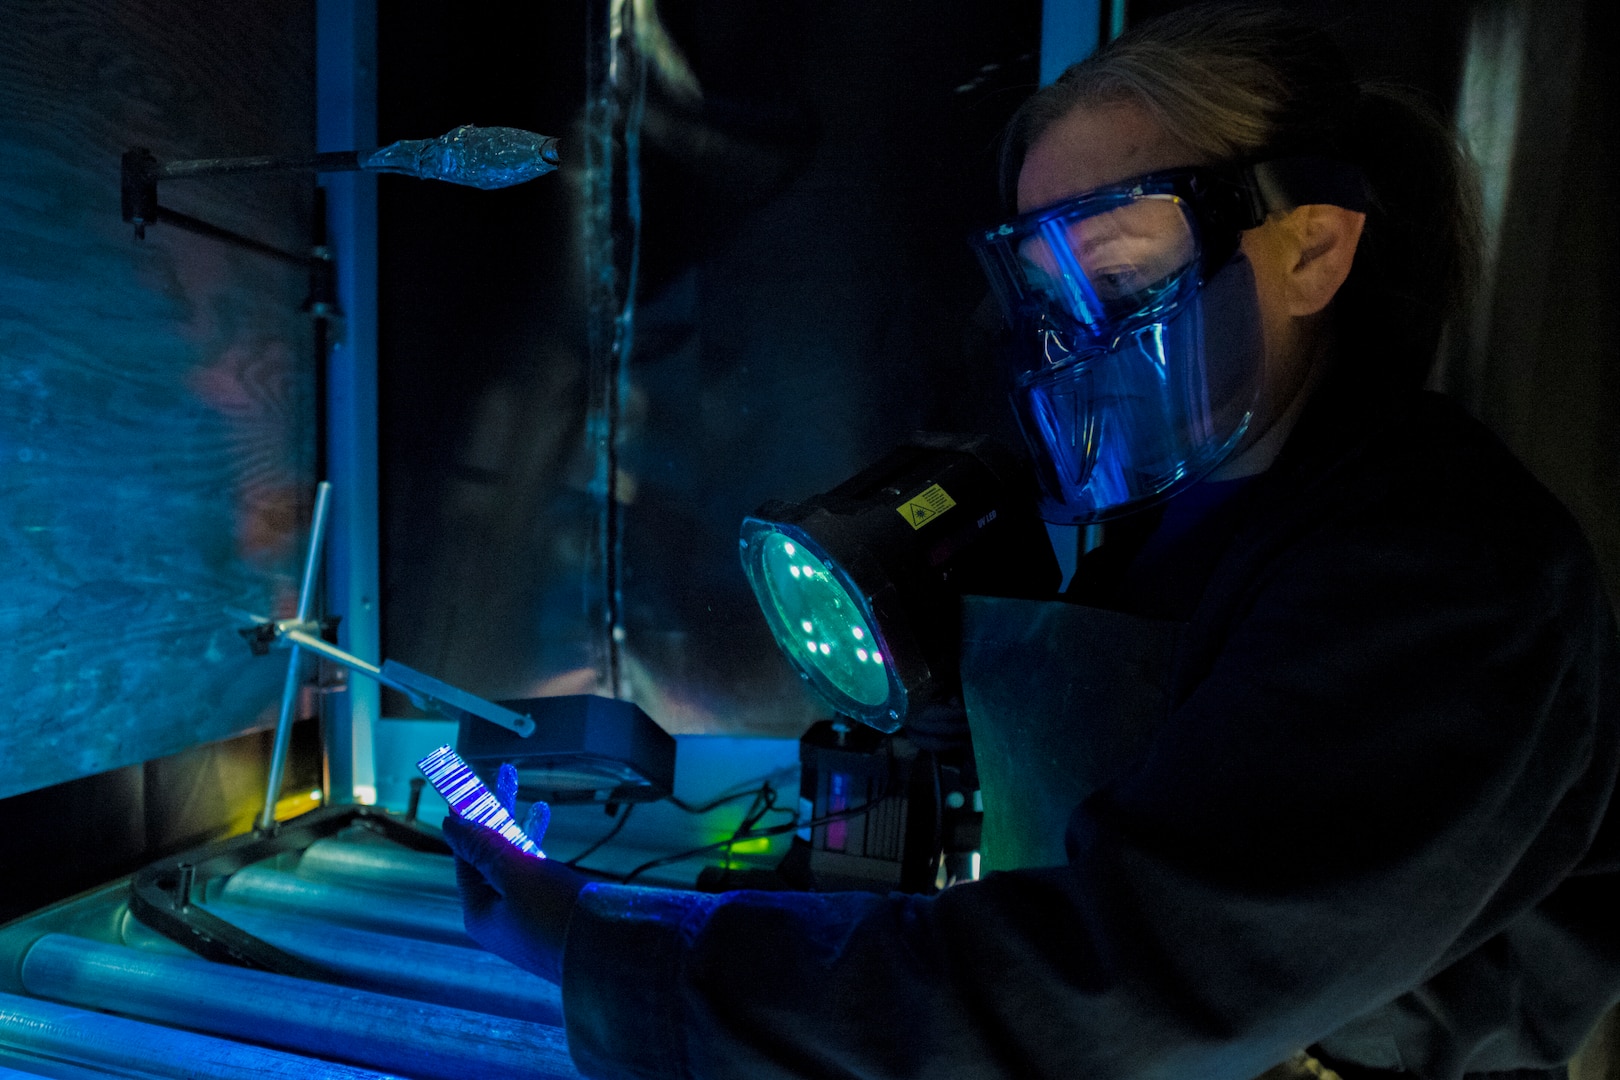 Amber Wedding, 437th Non Destructive Inspection test lead, checks a cracked chrome panel from a C-17 with a penetrant inspection system Nov. 1, 2019, at Joint Base Charleston, S.C. The penetrant inspection systems is designed for testing parts for defects or inconsistencies.